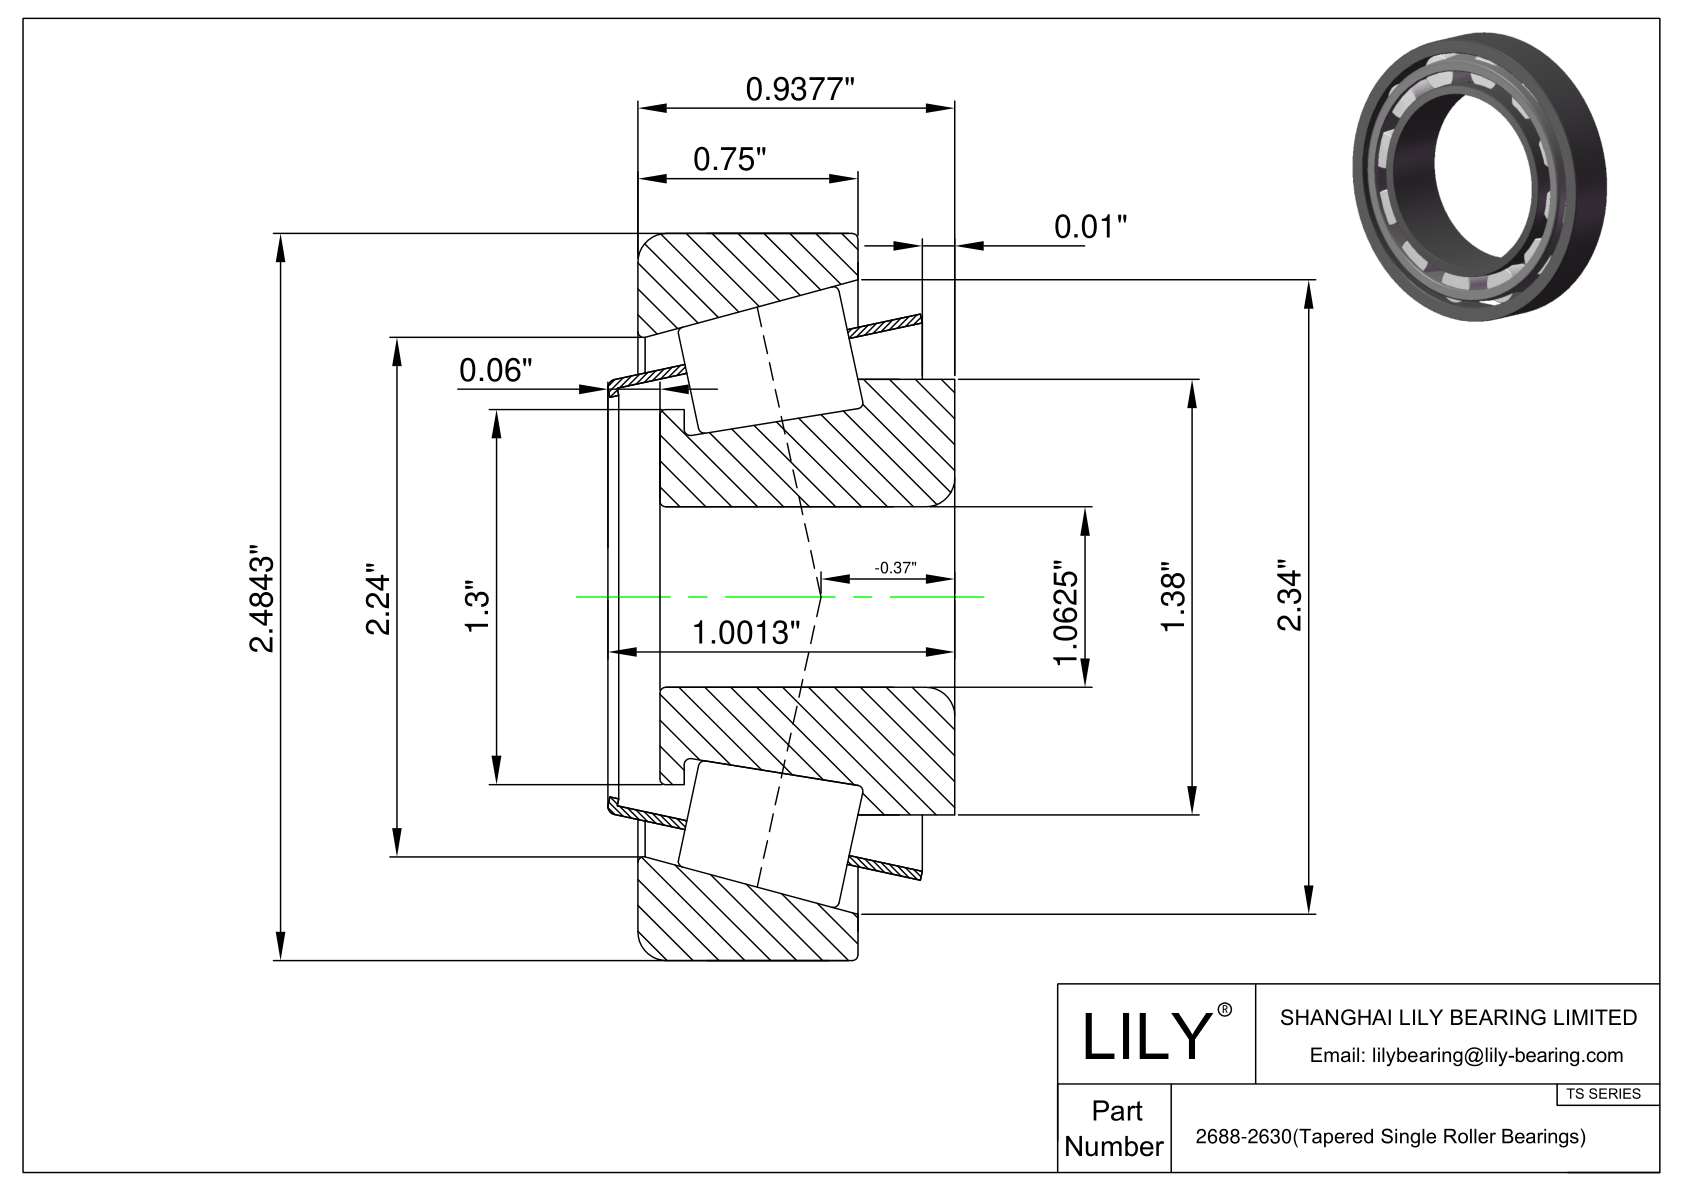 2688-2630 TS (Tapered Single Roller Bearings) (Imperial) cad drawing